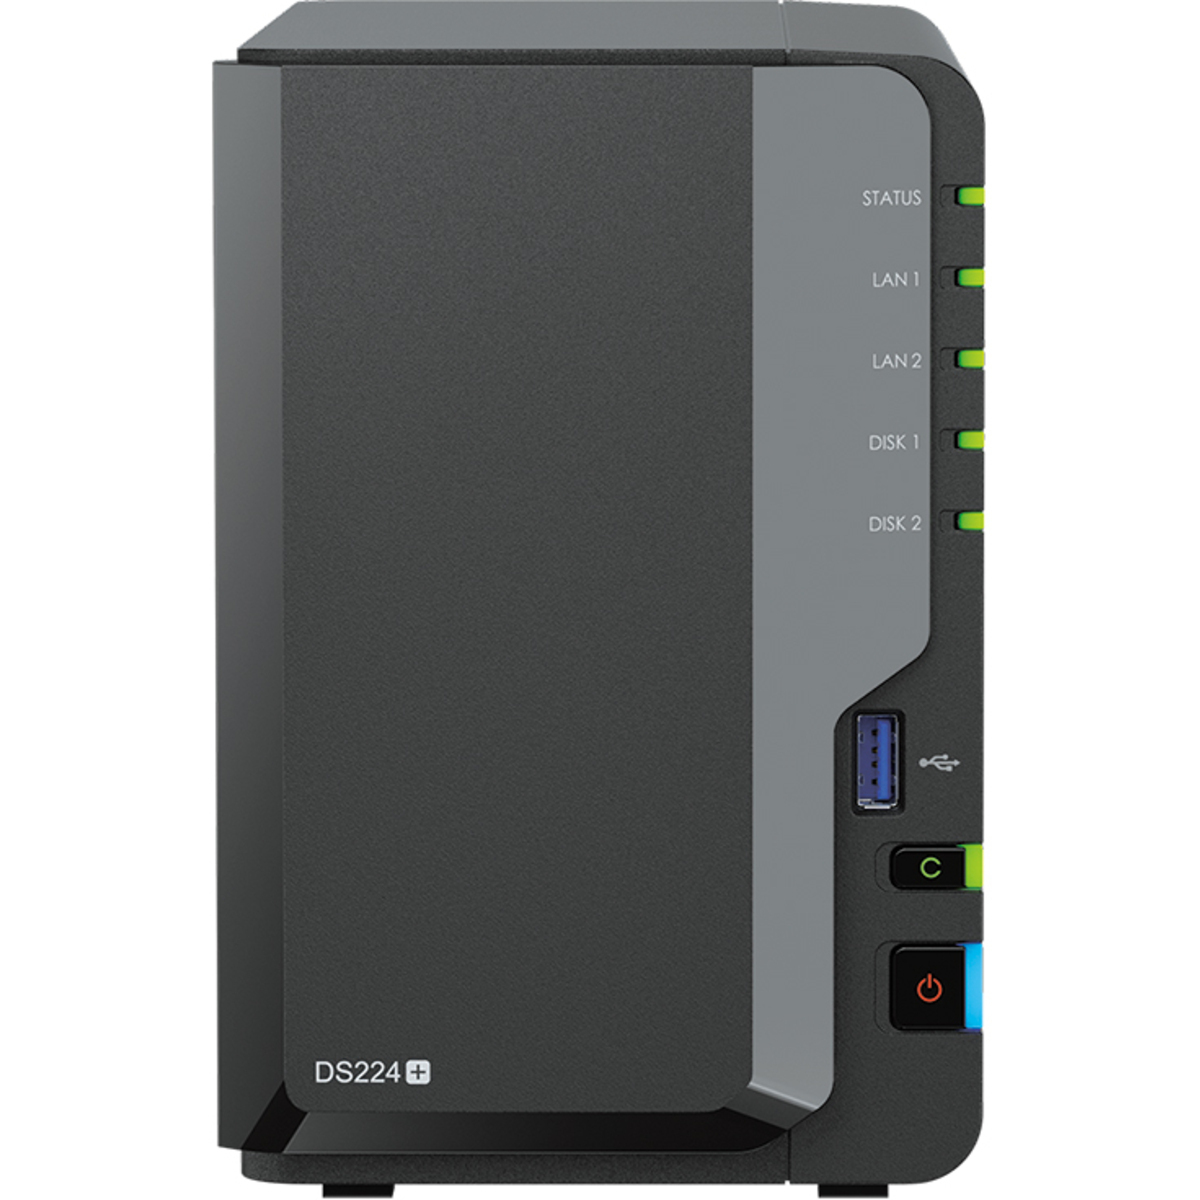 buy Synology DiskStation DS224+ 8tb Desktop NAS - Network Attached Storage Device 2x4000gb Samsung 870 EVO MZ-77E4T0BAM 2.5 560/530MB/s SATA 6Gb/s SSD CONSUMER Class Drives Installed - Burn-In Tested - ON SALE - FREE RAM UPGRADE - nas headquarters buy network attached storage server device das new raid-5 free shipping simply usa DiskStation DS224+